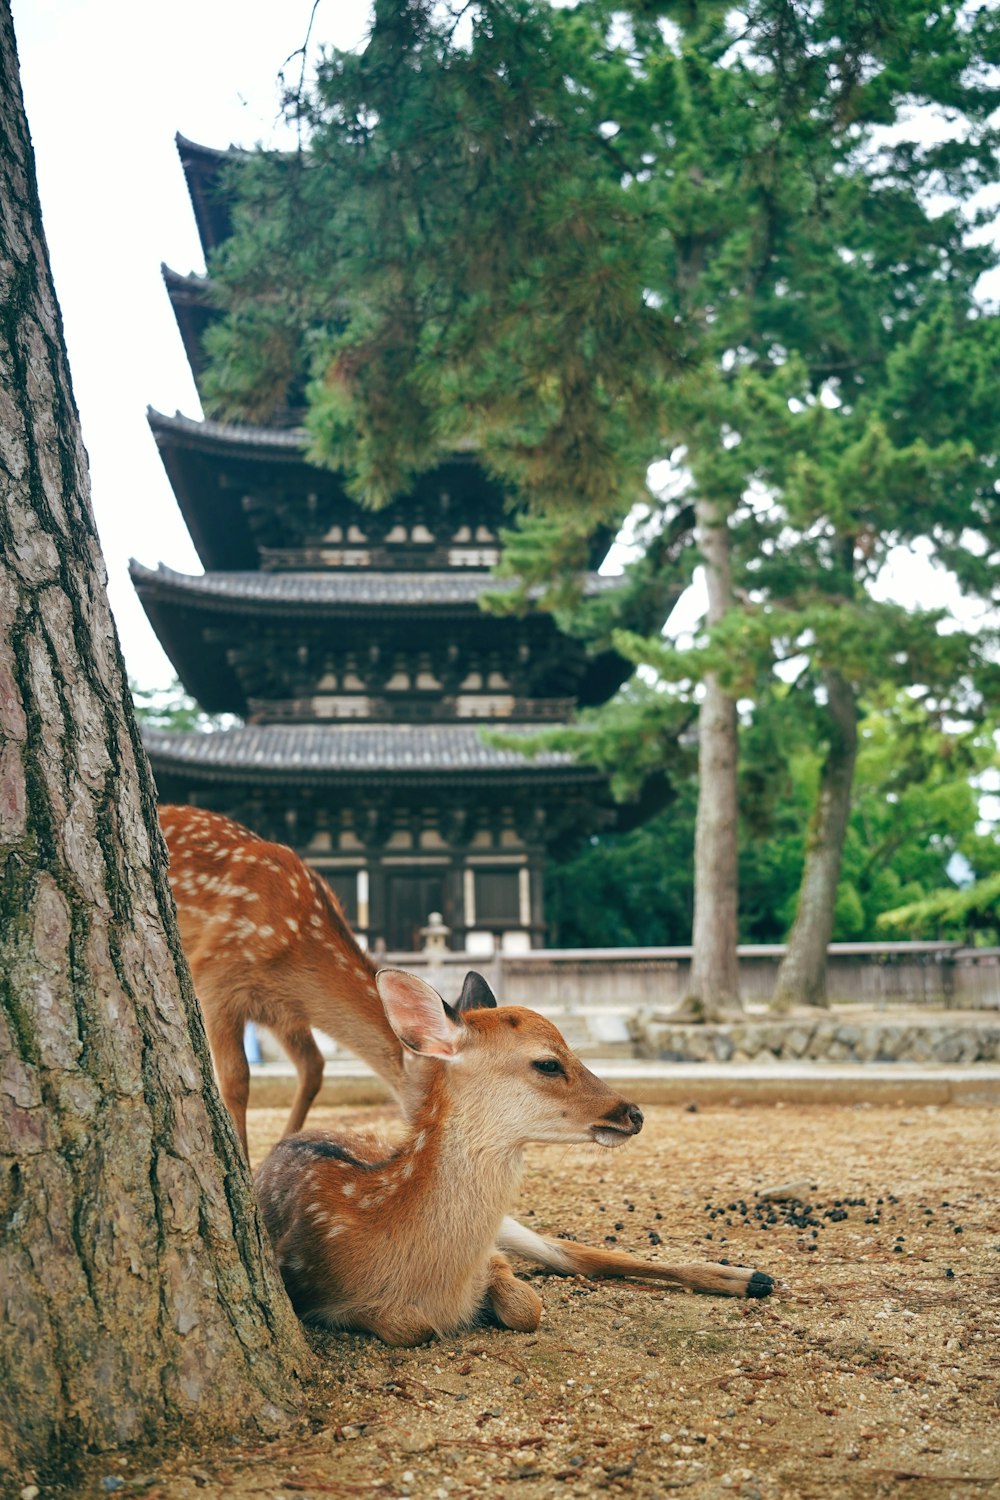 a deer and a fawn sitting under a tree in front of a pagoda